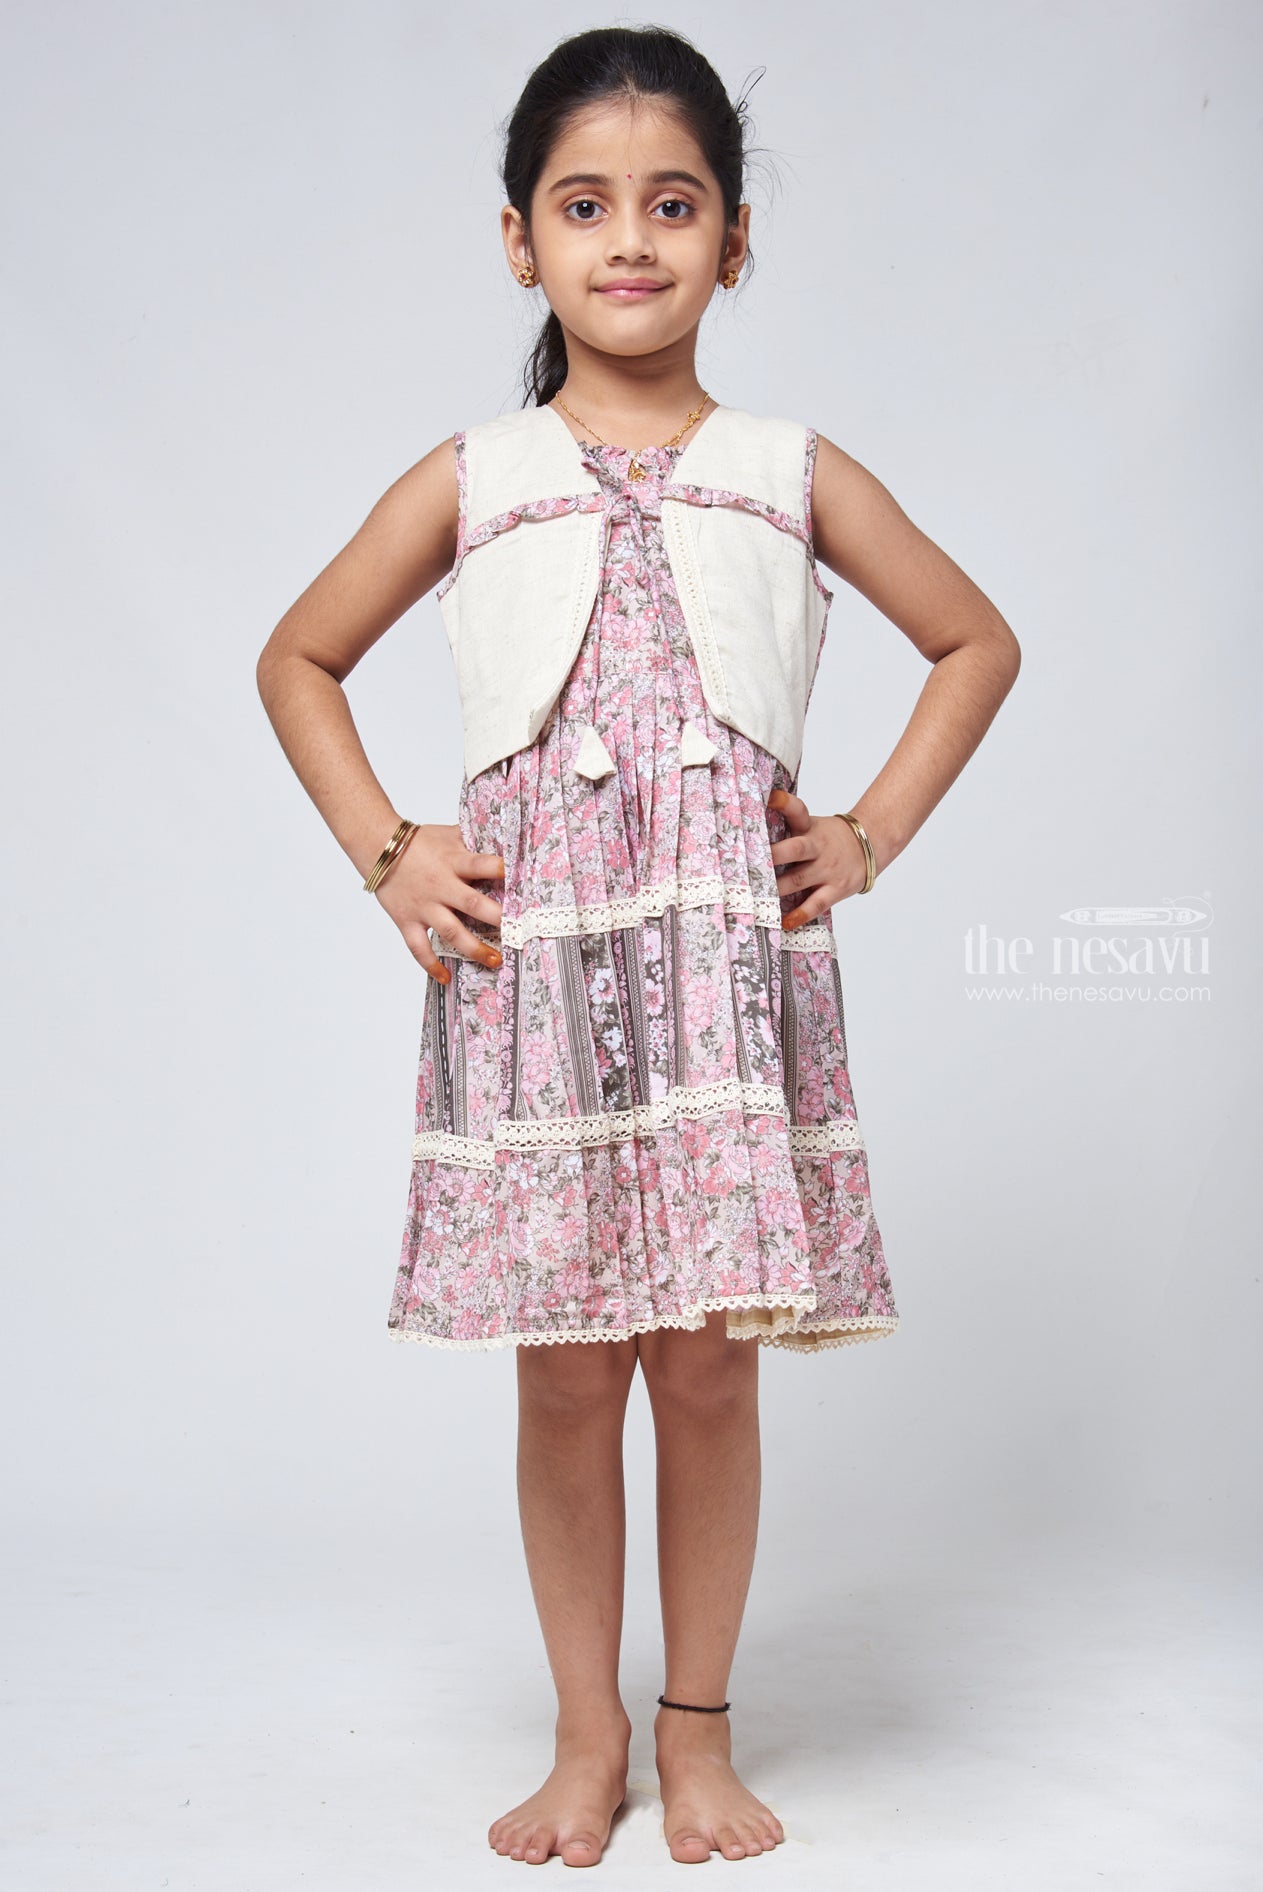 Girl Half Sleeve Dress : Amazon.in: Clothing & Accessories